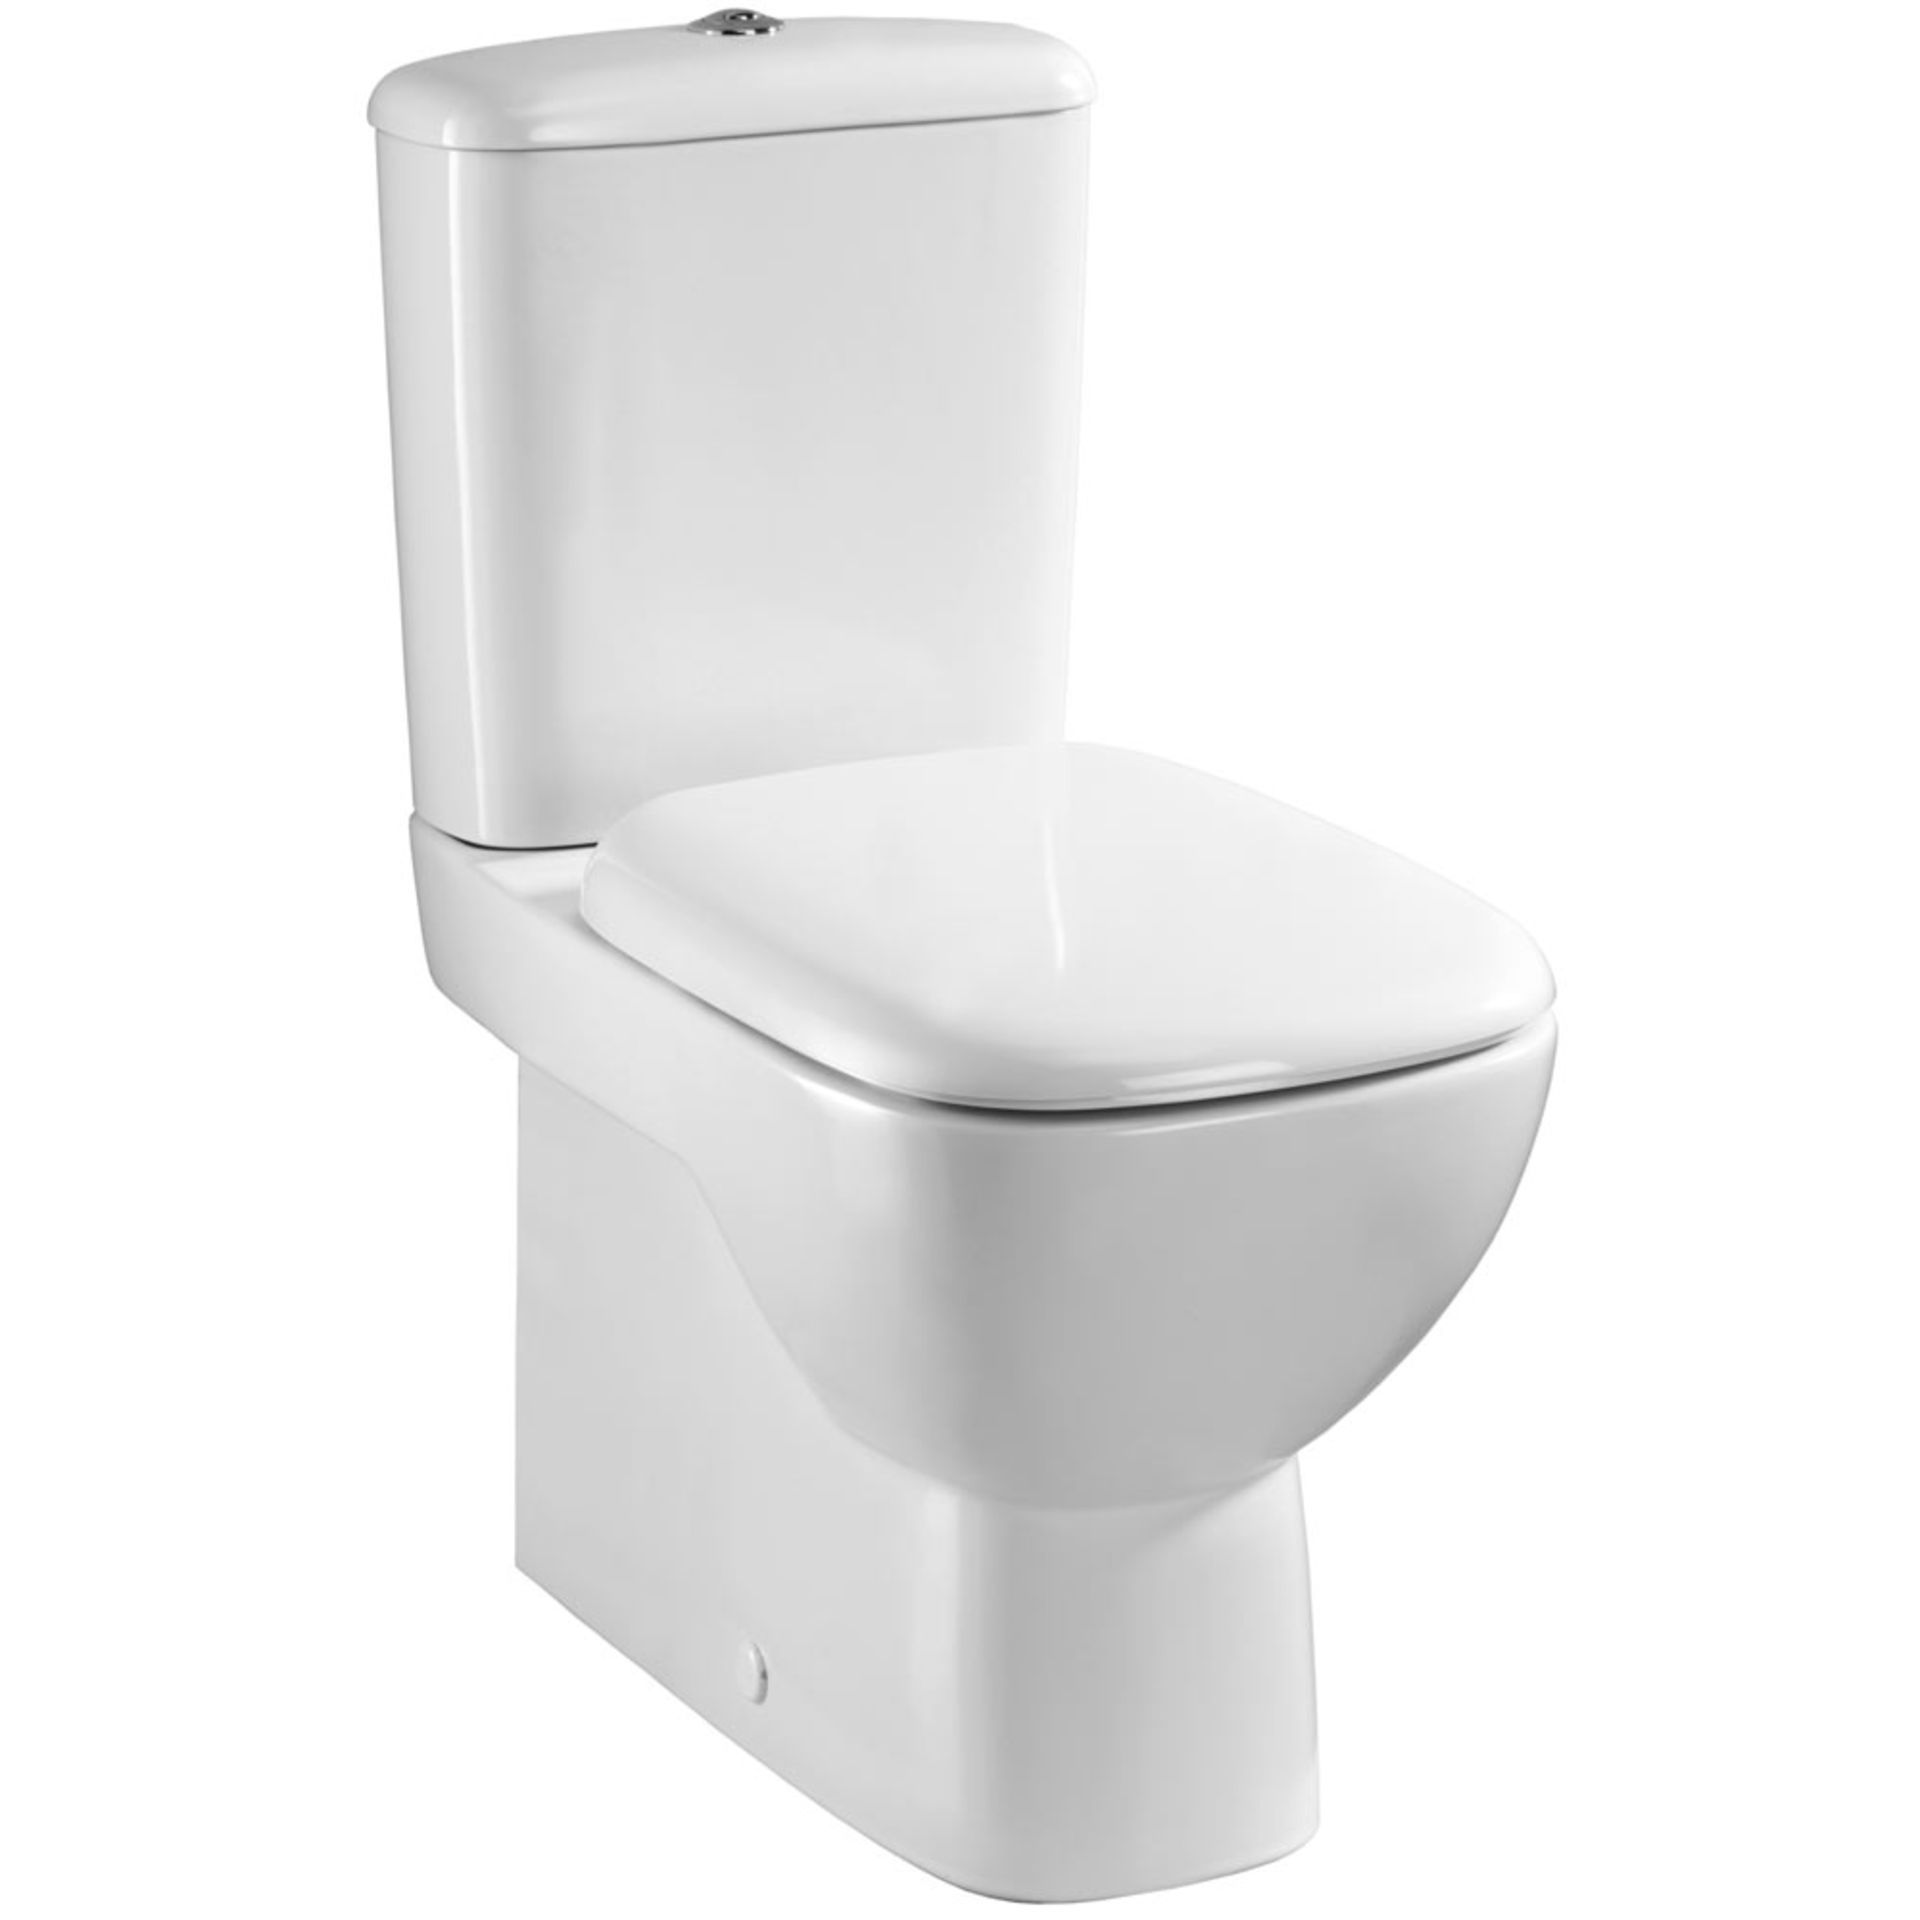 New Twyford Moda Close Coupled Wc RRP £636.99.The Moda Close Coupled Toilet Is A Stylish And e... - Image 2 of 2